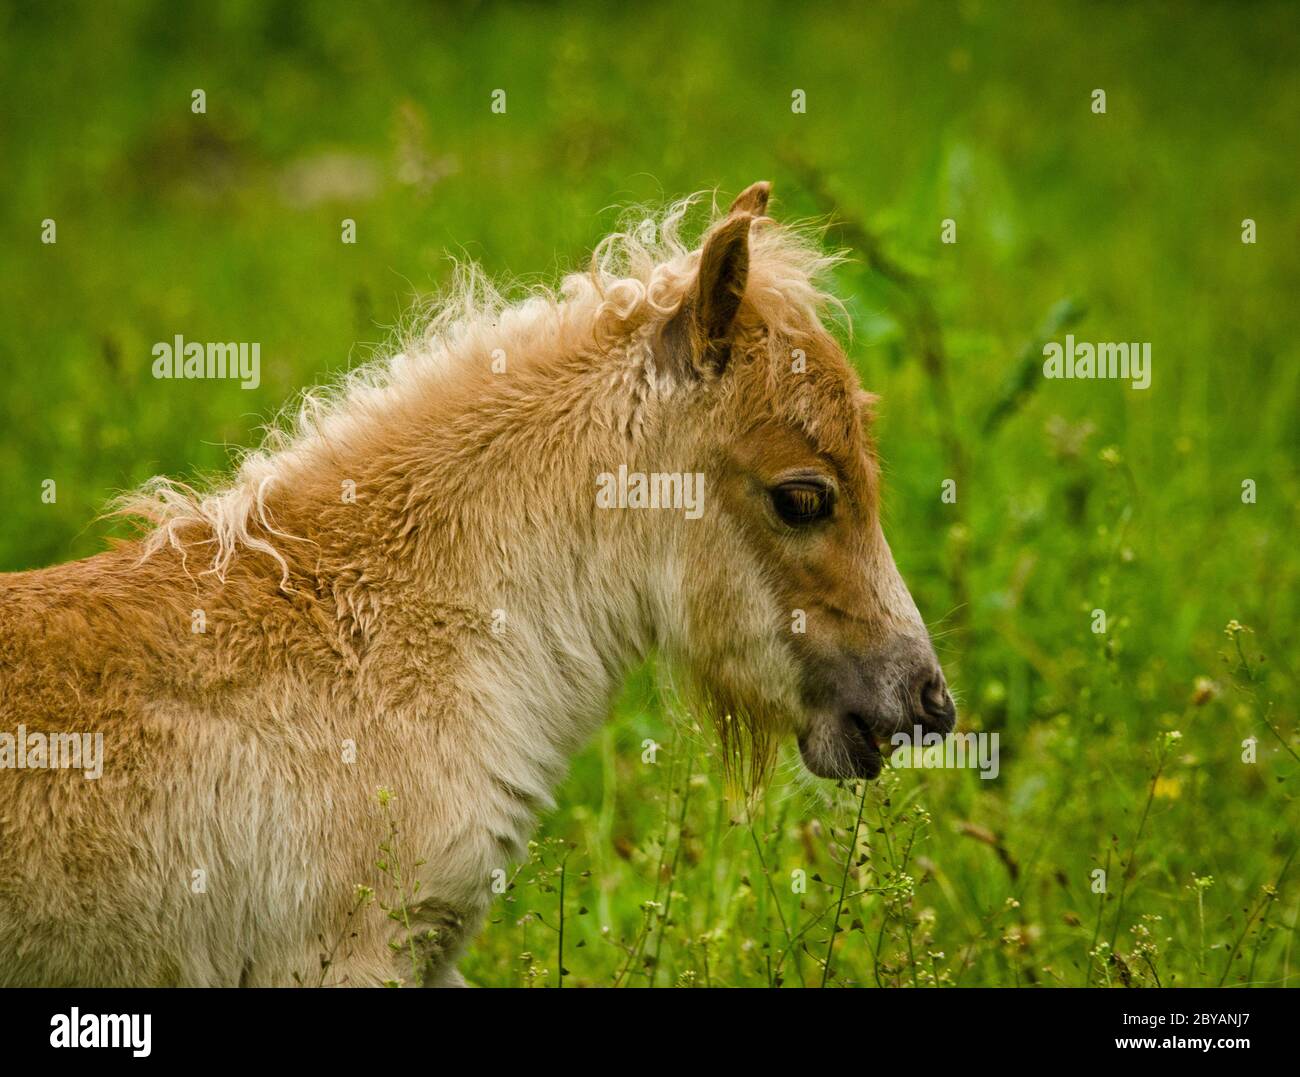 A newborn small chestnut foal of a shetland pony is tasting a little bit of grass, a cute and georgous portrait Stock Photo